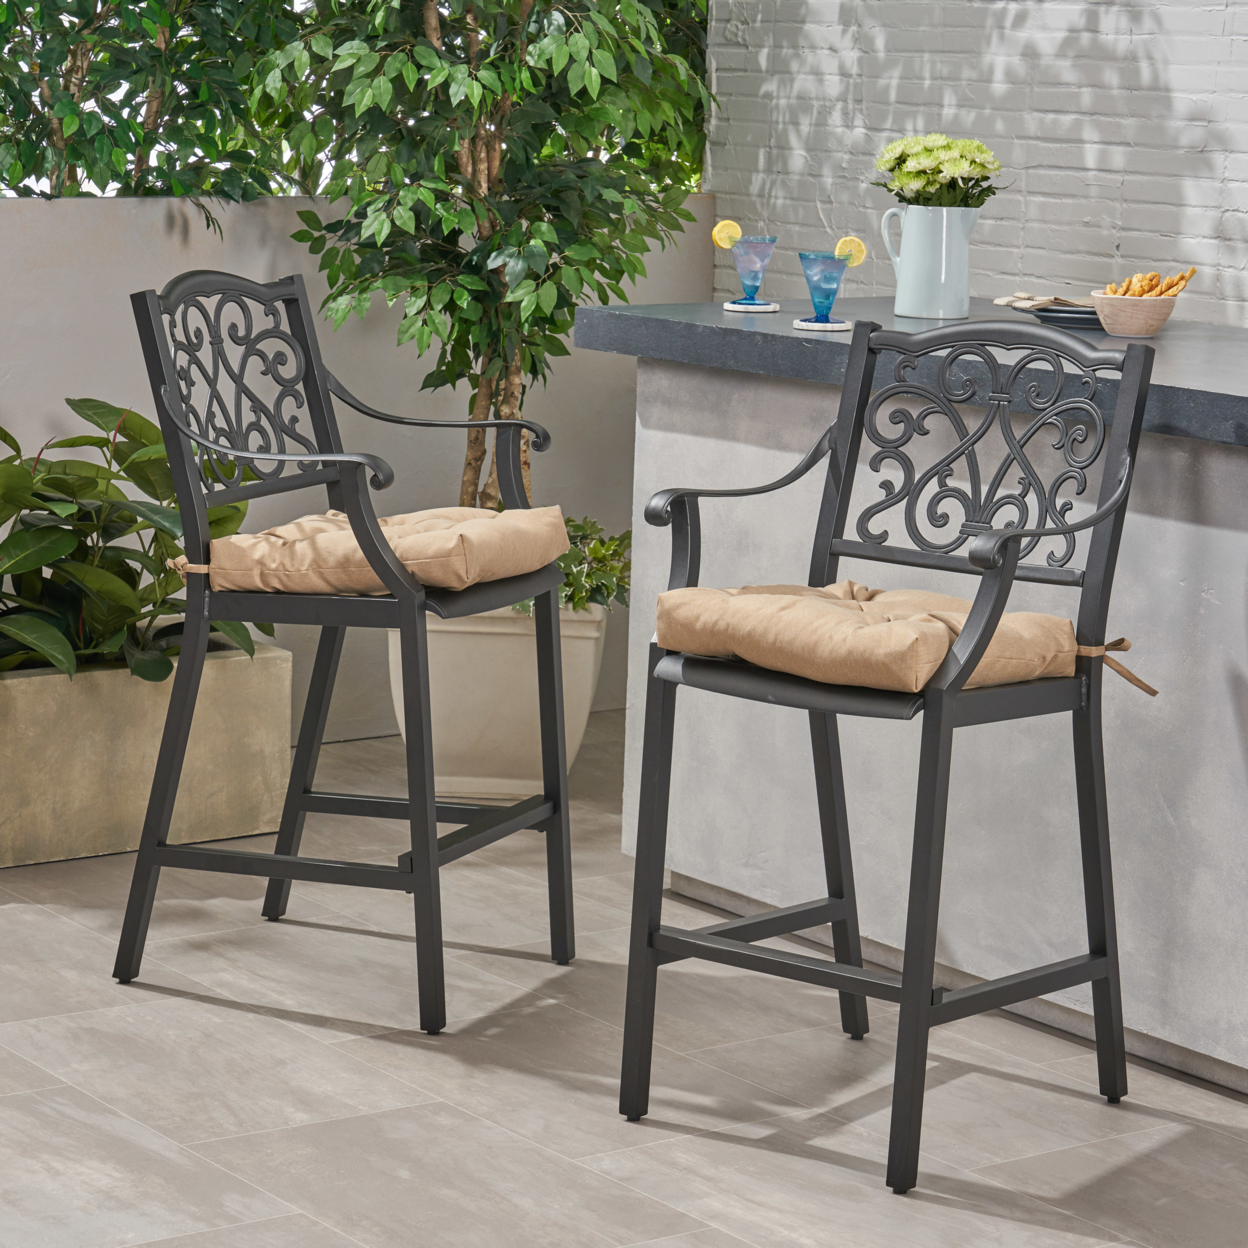 Roberta Outdoor Barstool With Cushion (Set Of 2) Antique Matte Black And Charcoal - Antique Matte Black + Tuscany